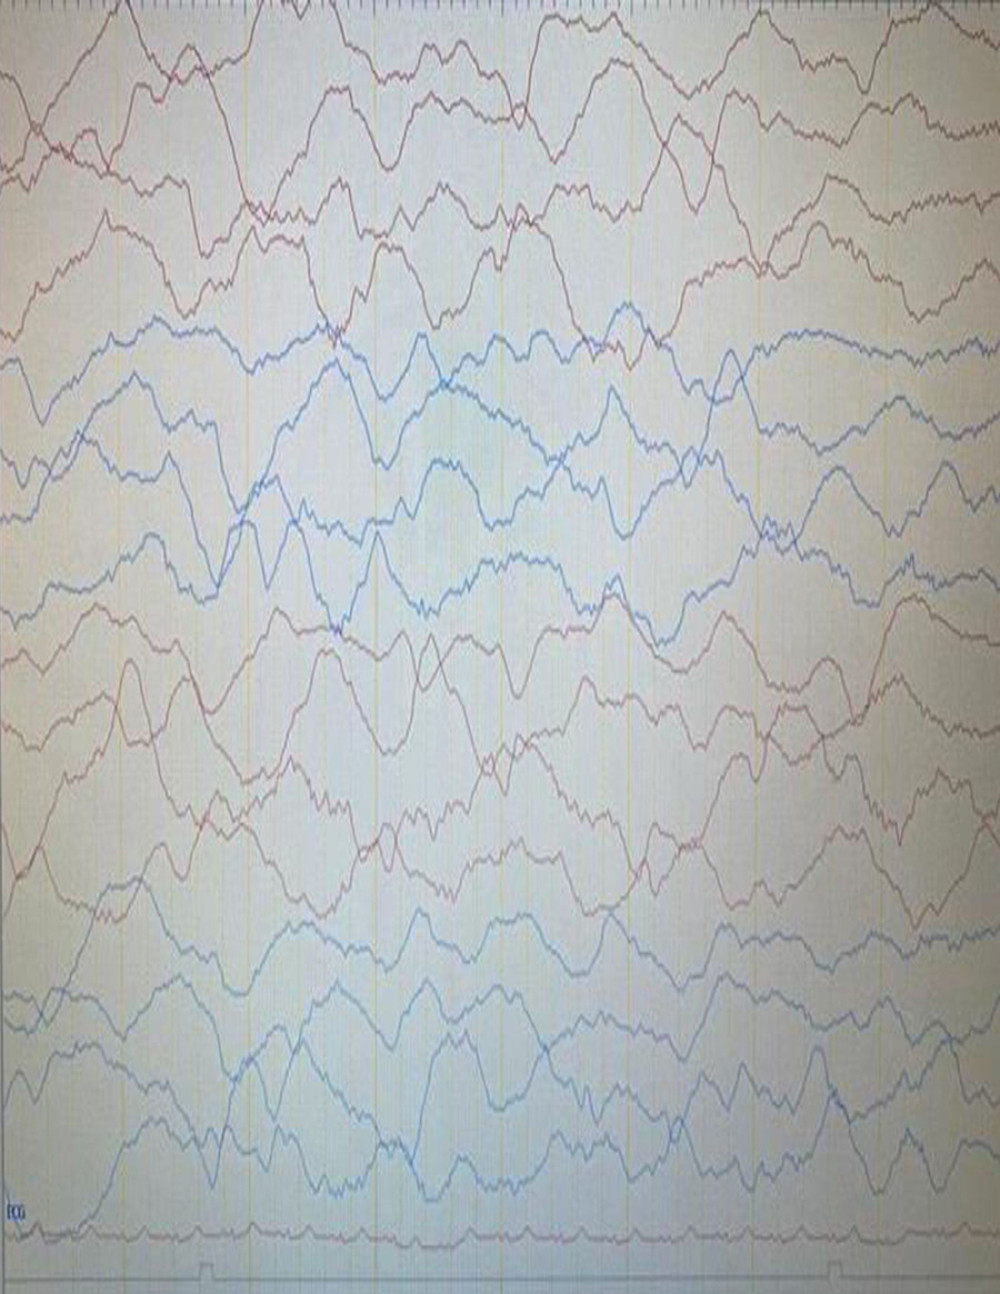 Initial EEG showed an encephalopathic picture.